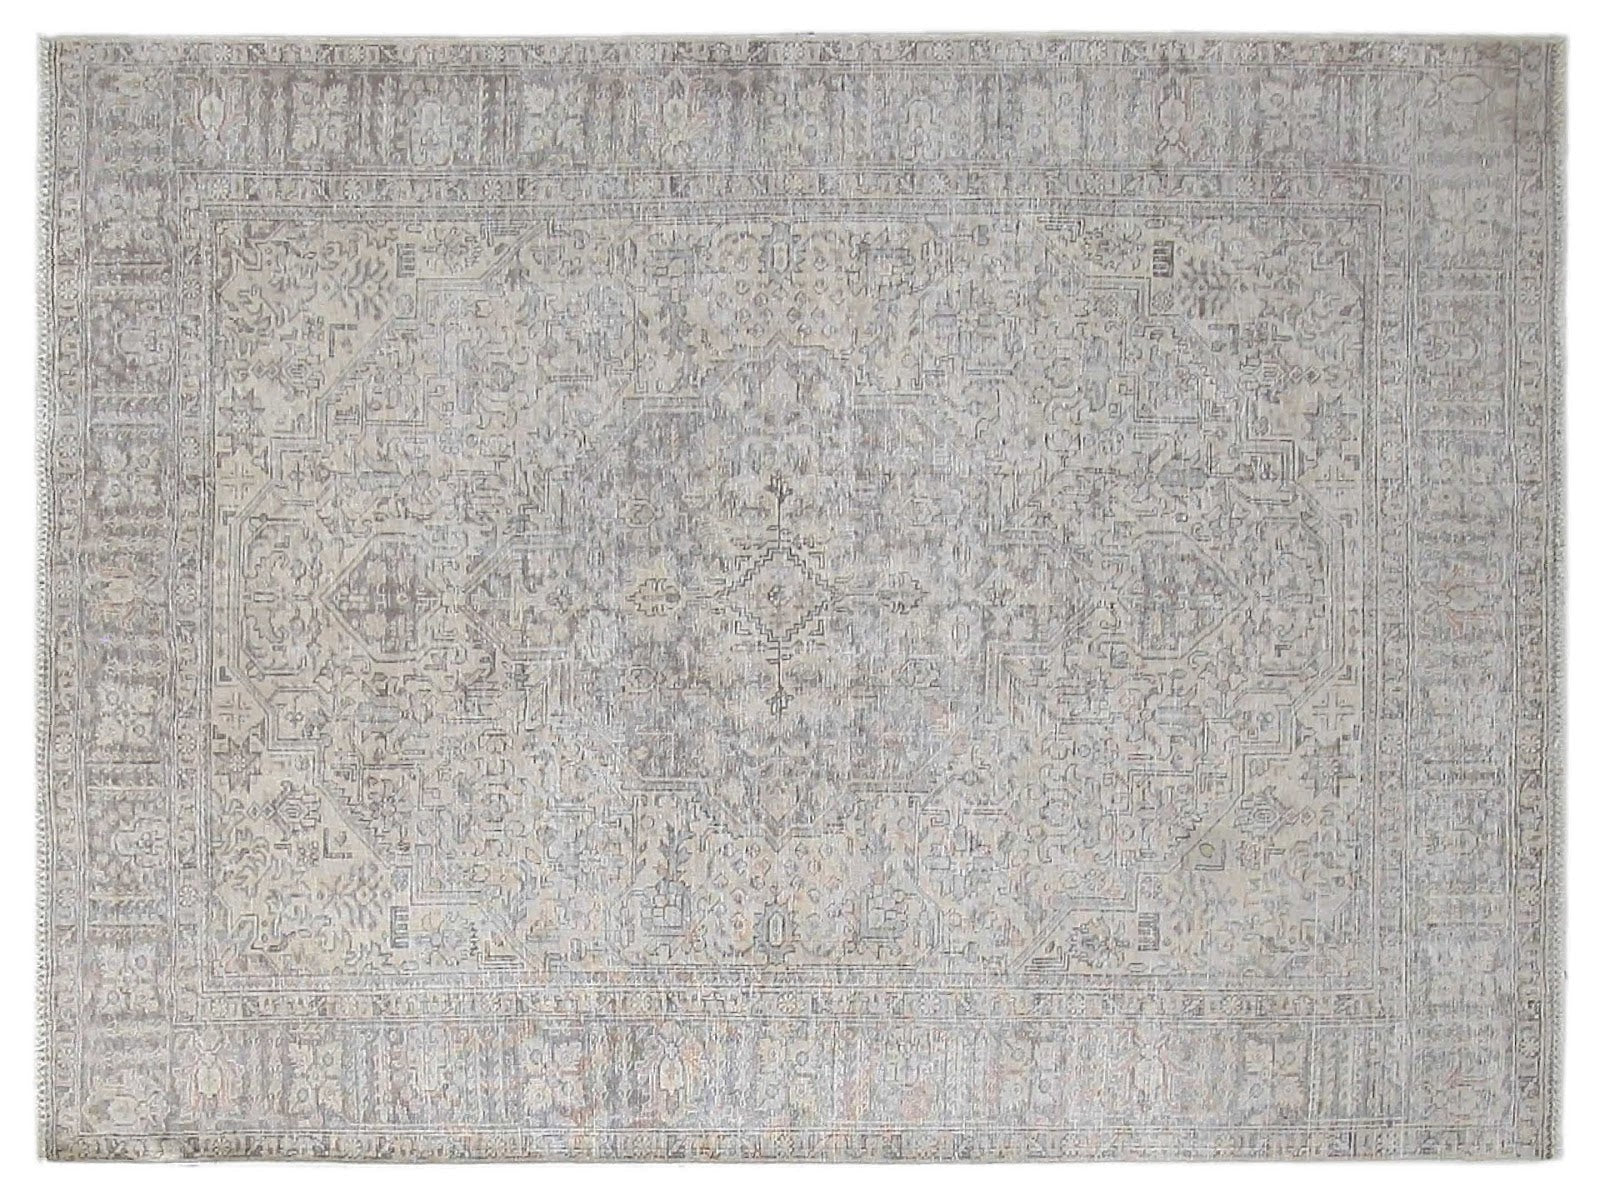 8x10 vintage Persian wool rug with muted neutral colors and traditional motifs, handwoven in Persia